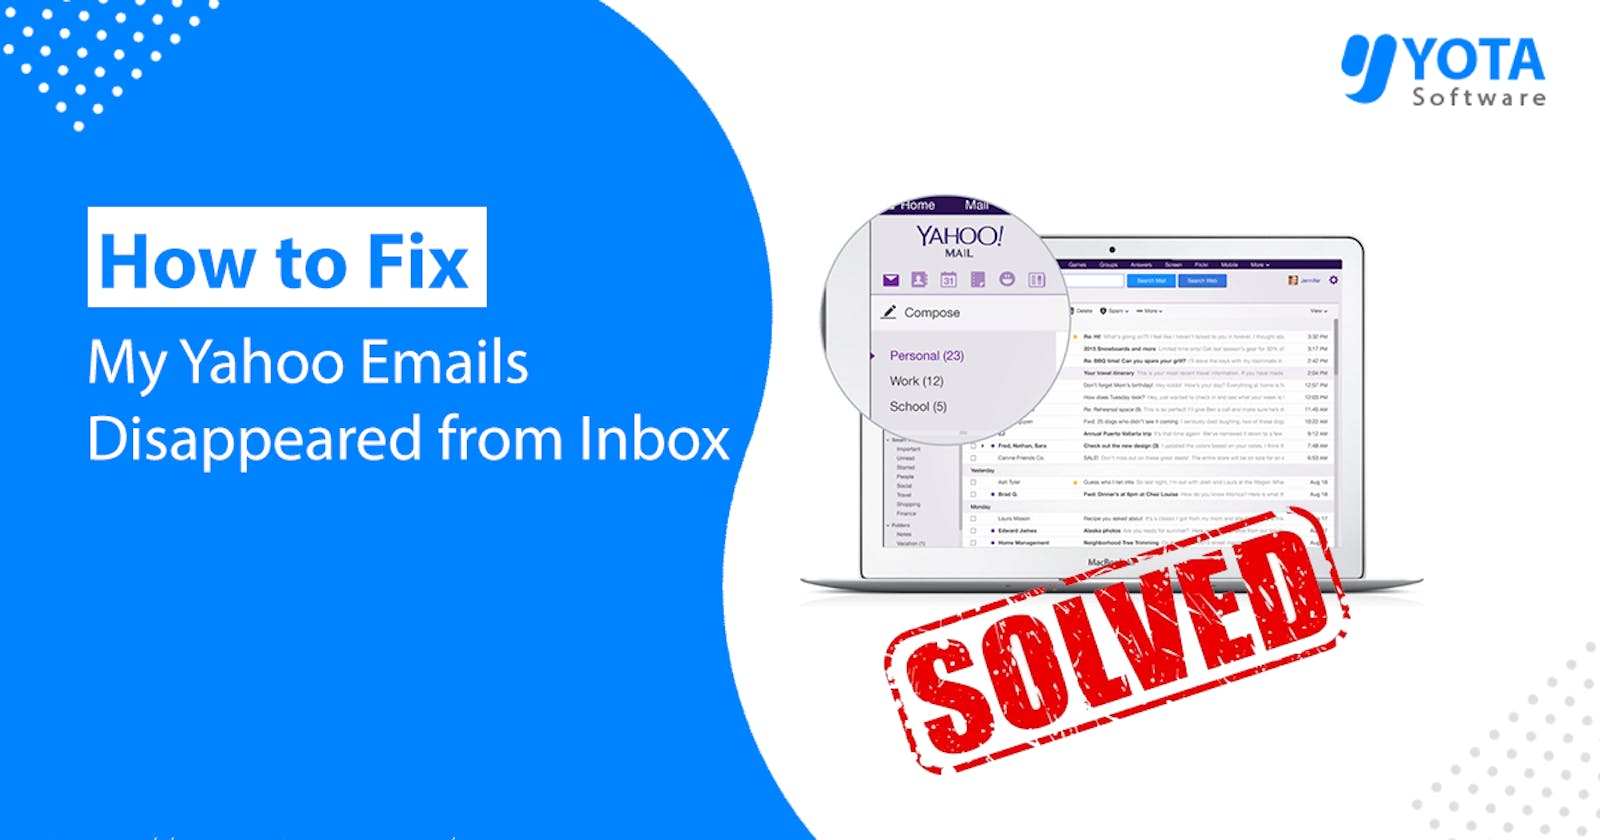 How to Restore Missing Emails from Yahoo Account?